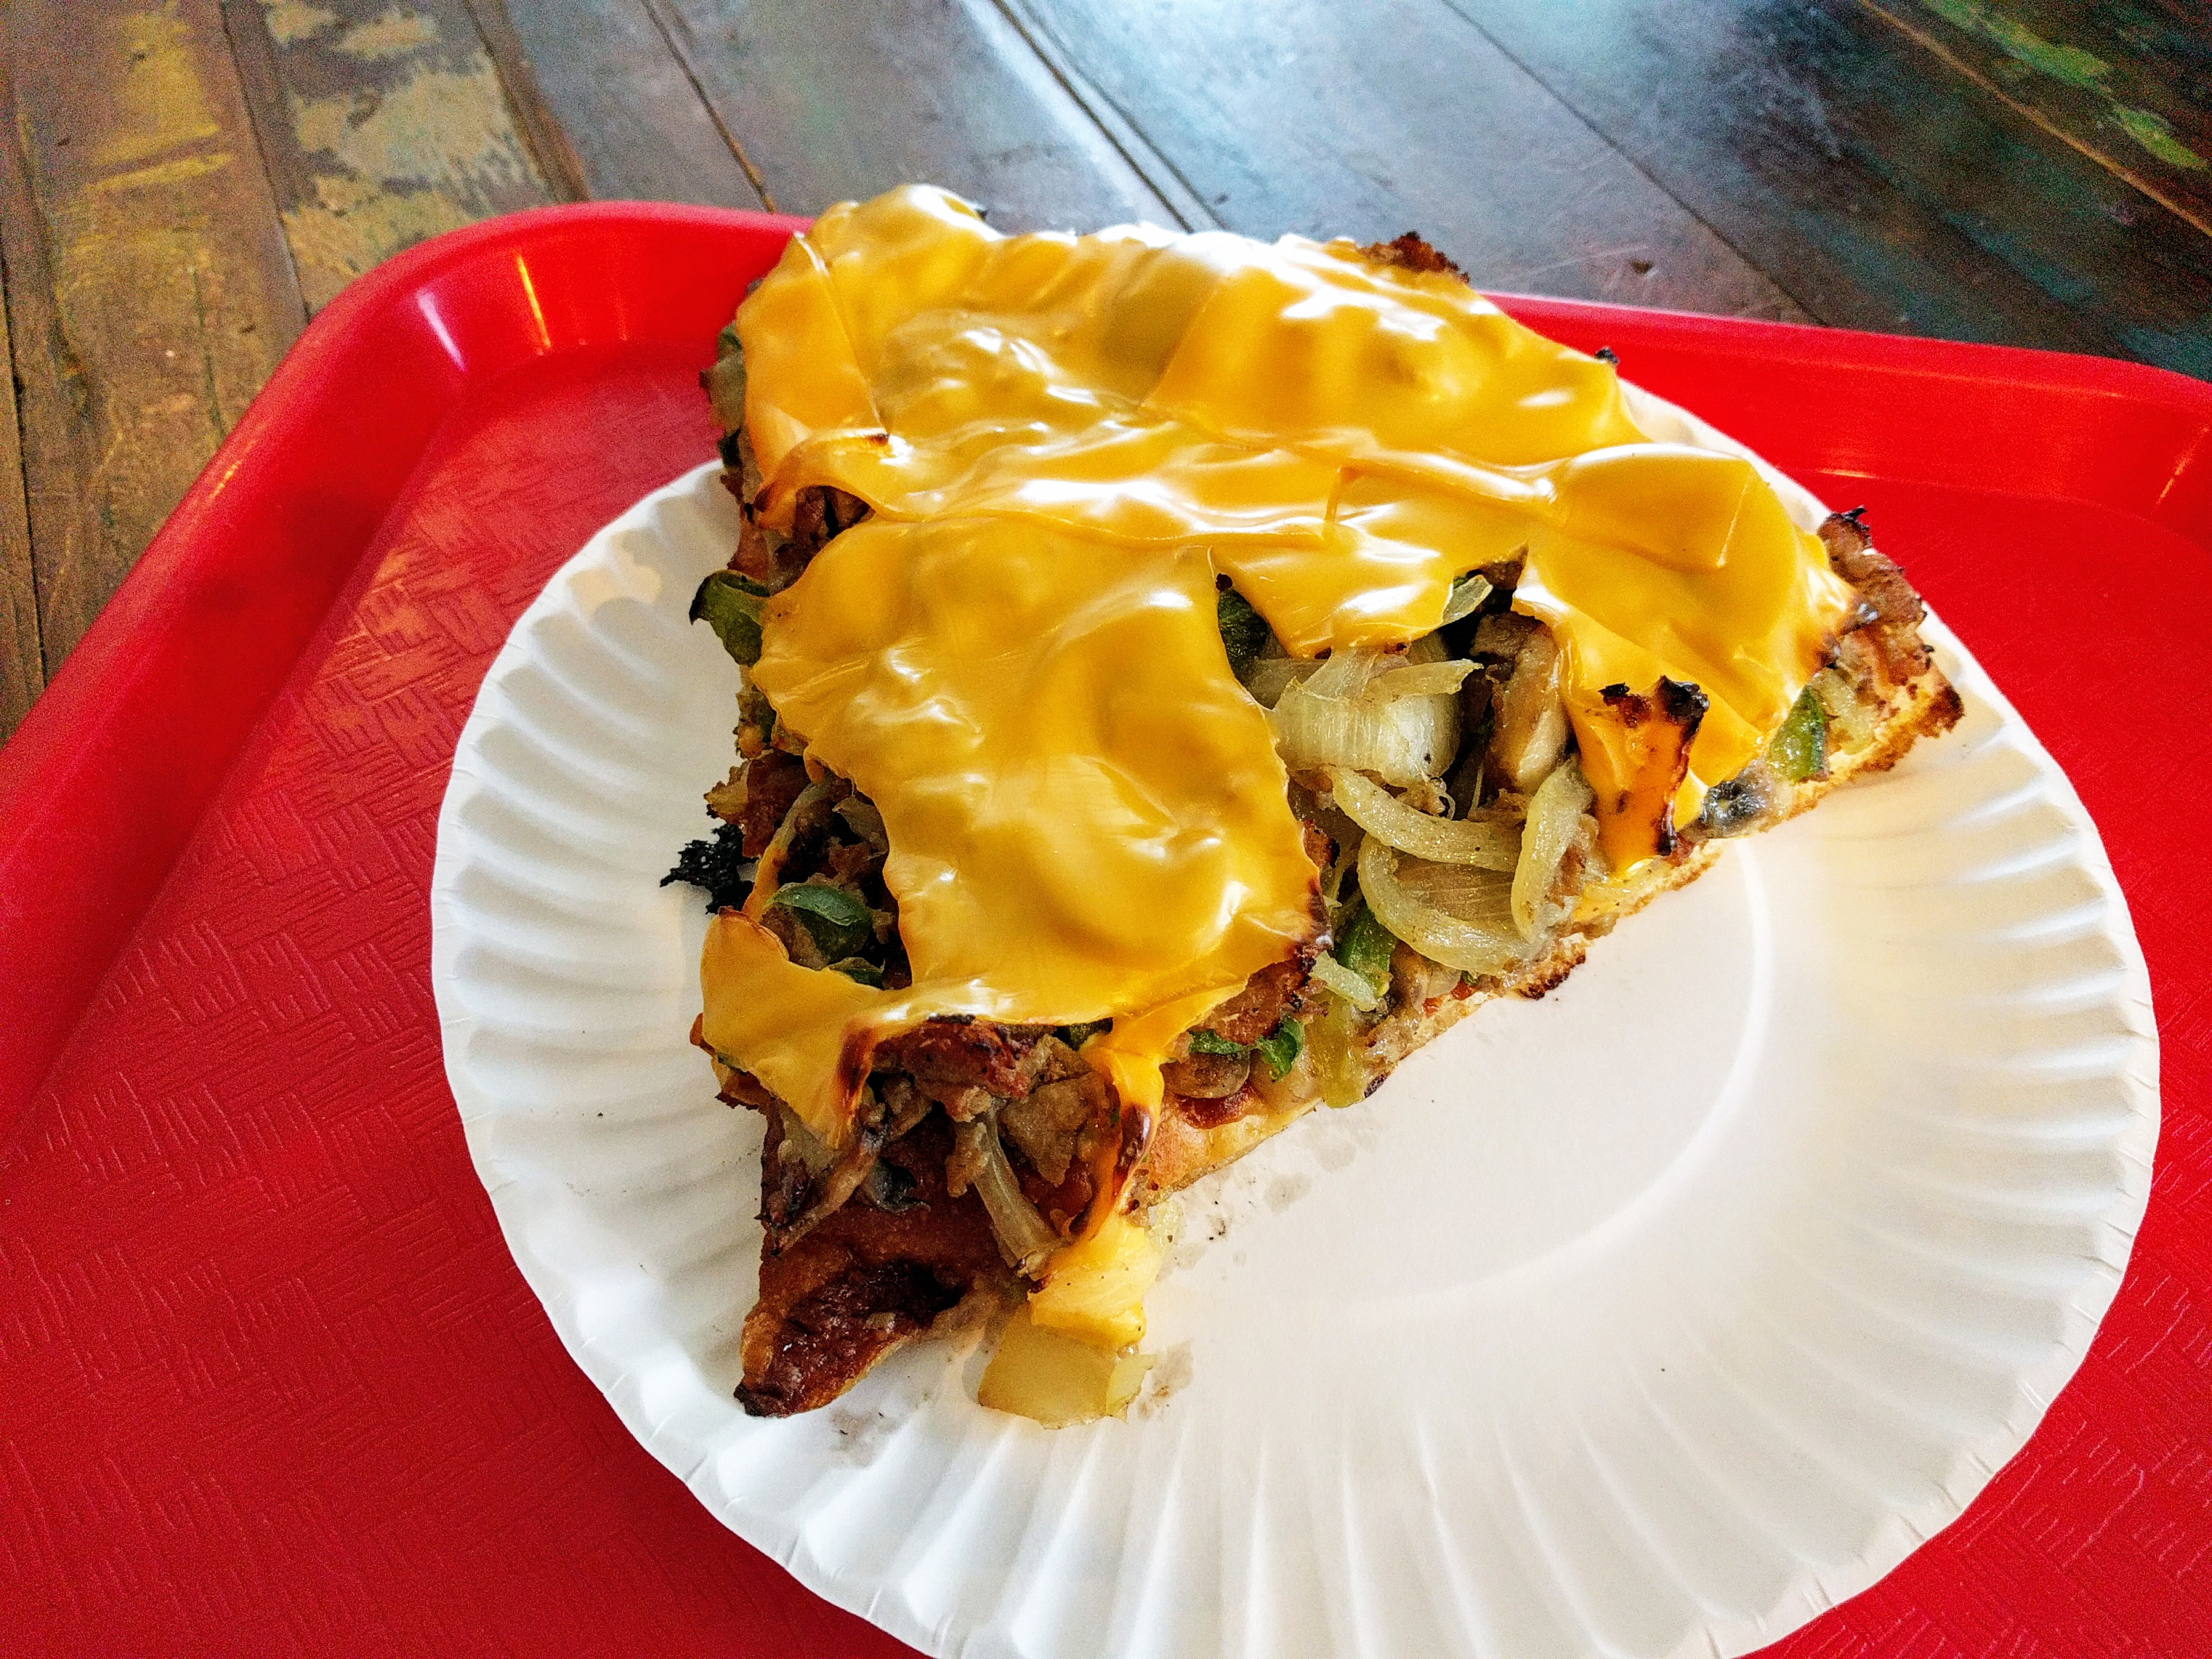 The Philly Cheese Steak Slice at Lenny’s channels its Philadelphia original.